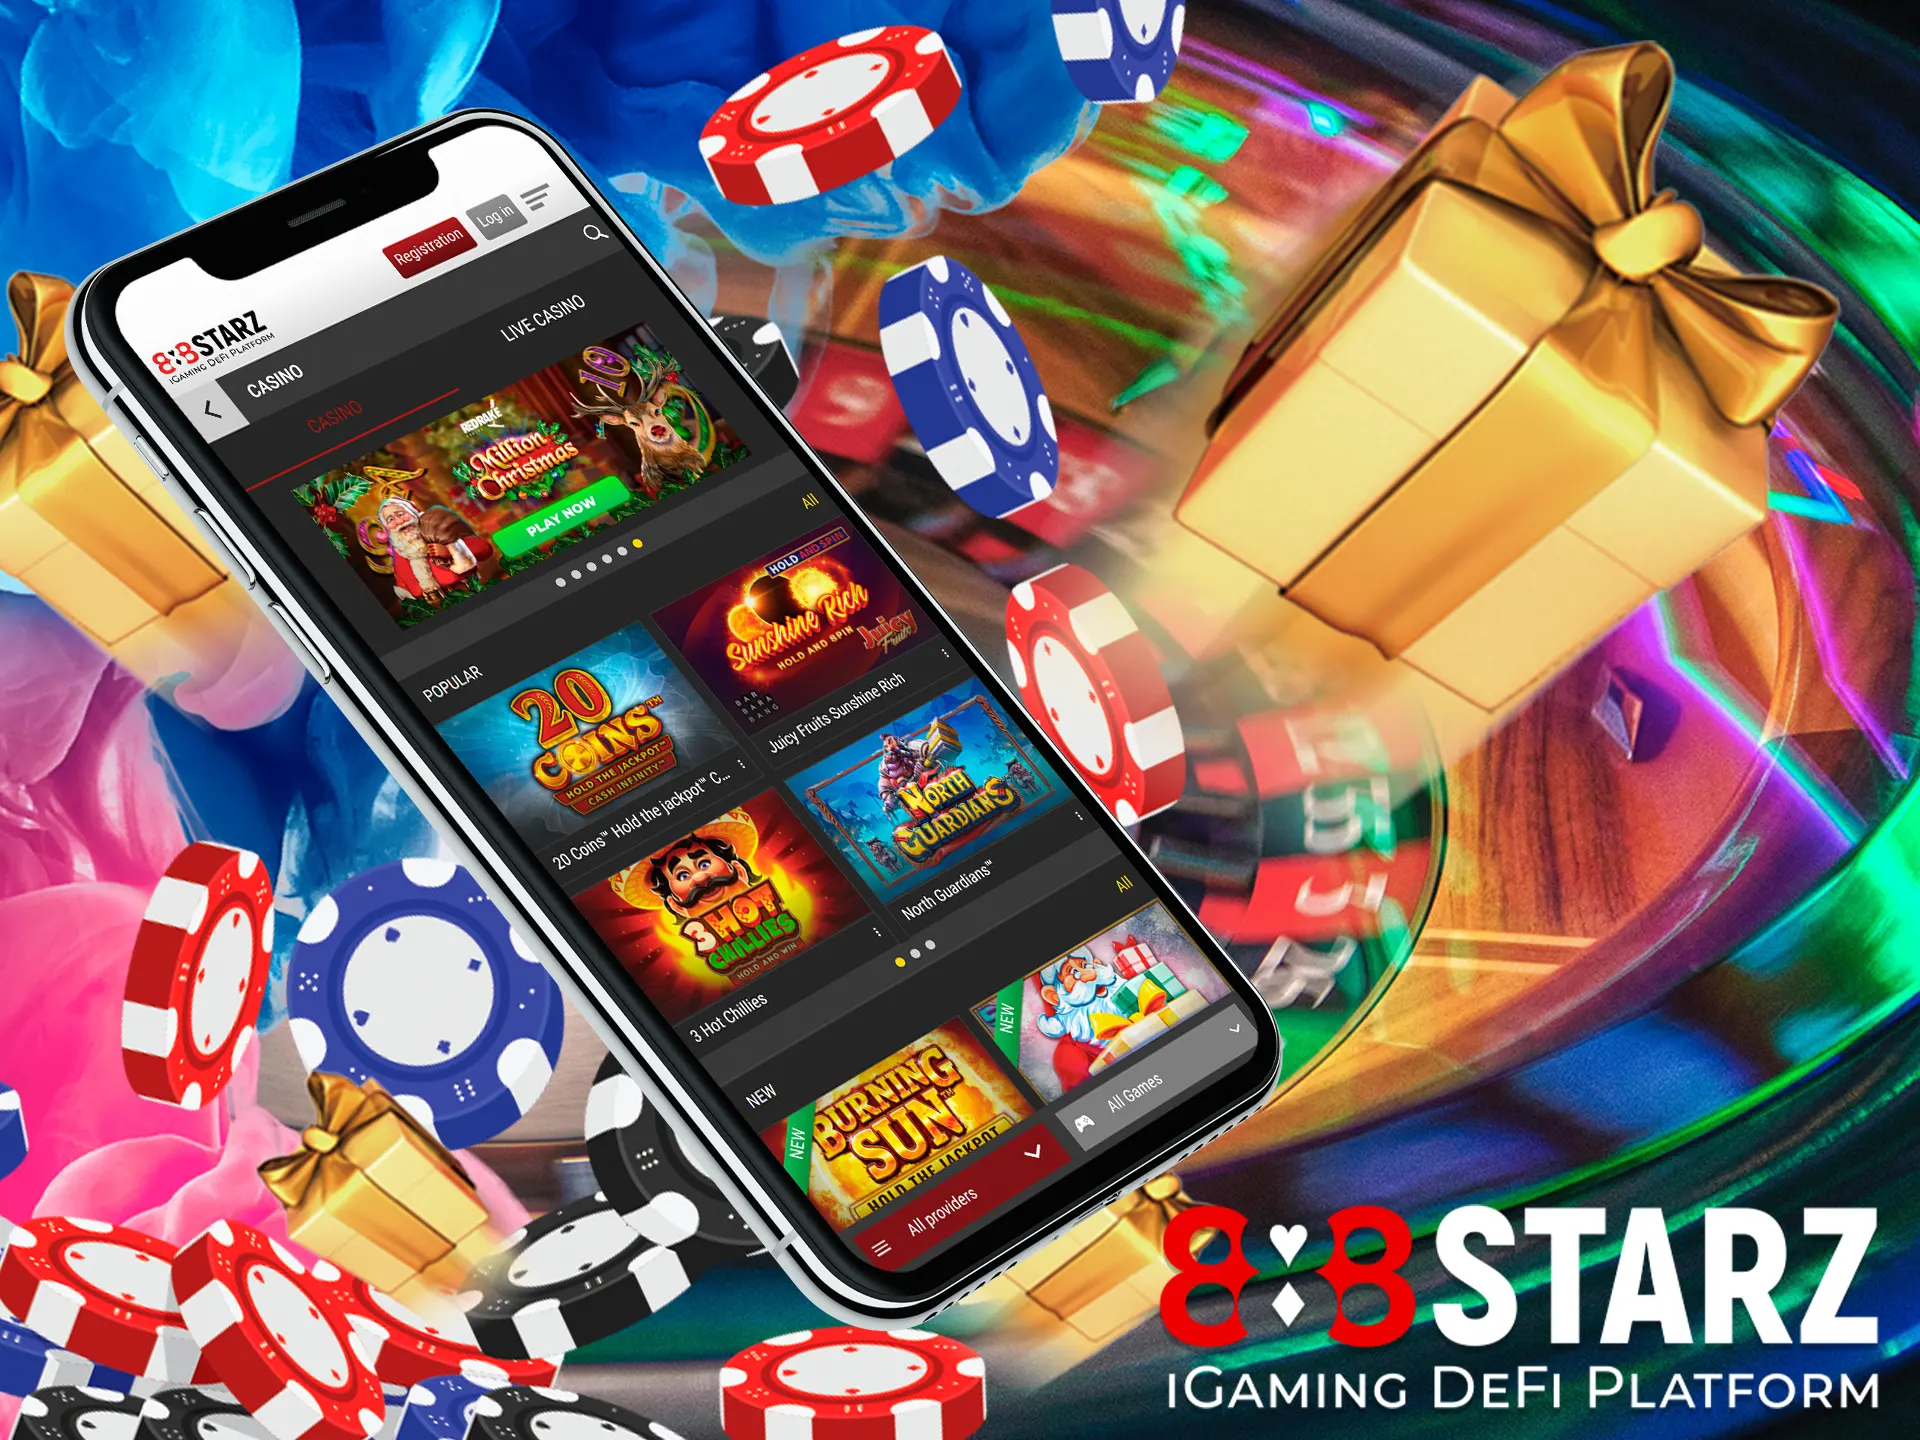 New users will receive a nice compliment from 888starz for creating an account, it can be used in casino.